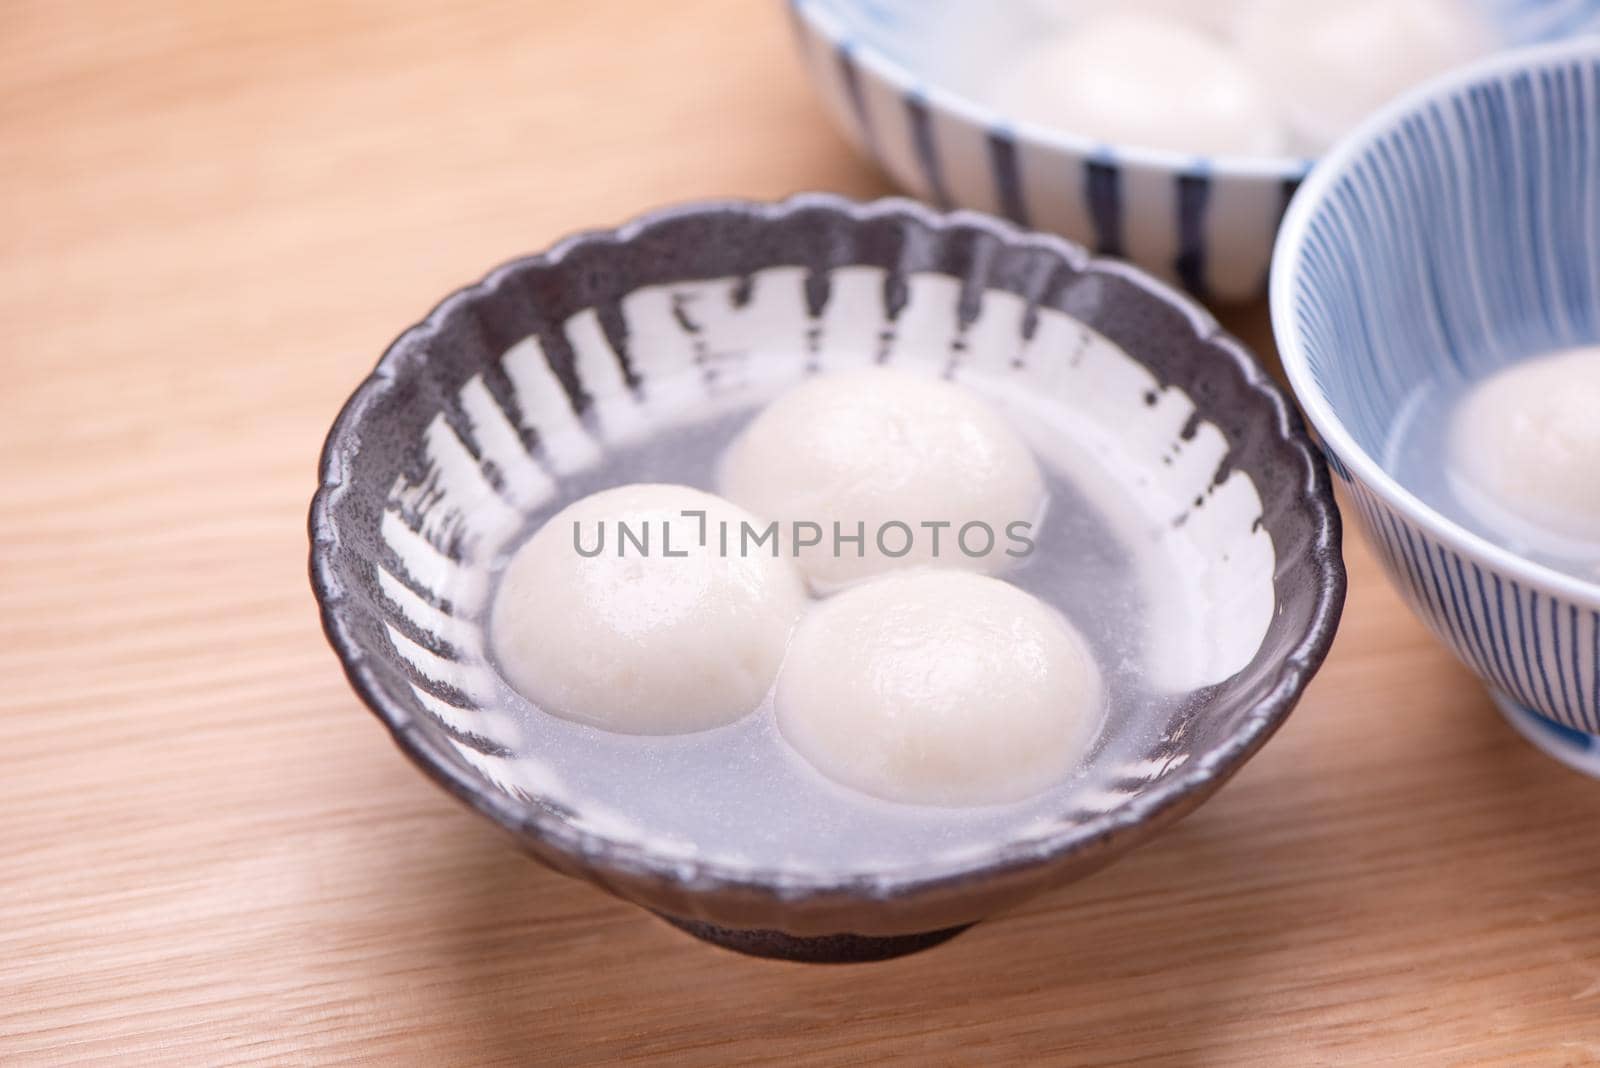 Delicious tang yuan, yuanxiao in a small bowl. Traditional festive food rice dumplings ball with stuffed fillings for Chinese Lantern Festival, close up.